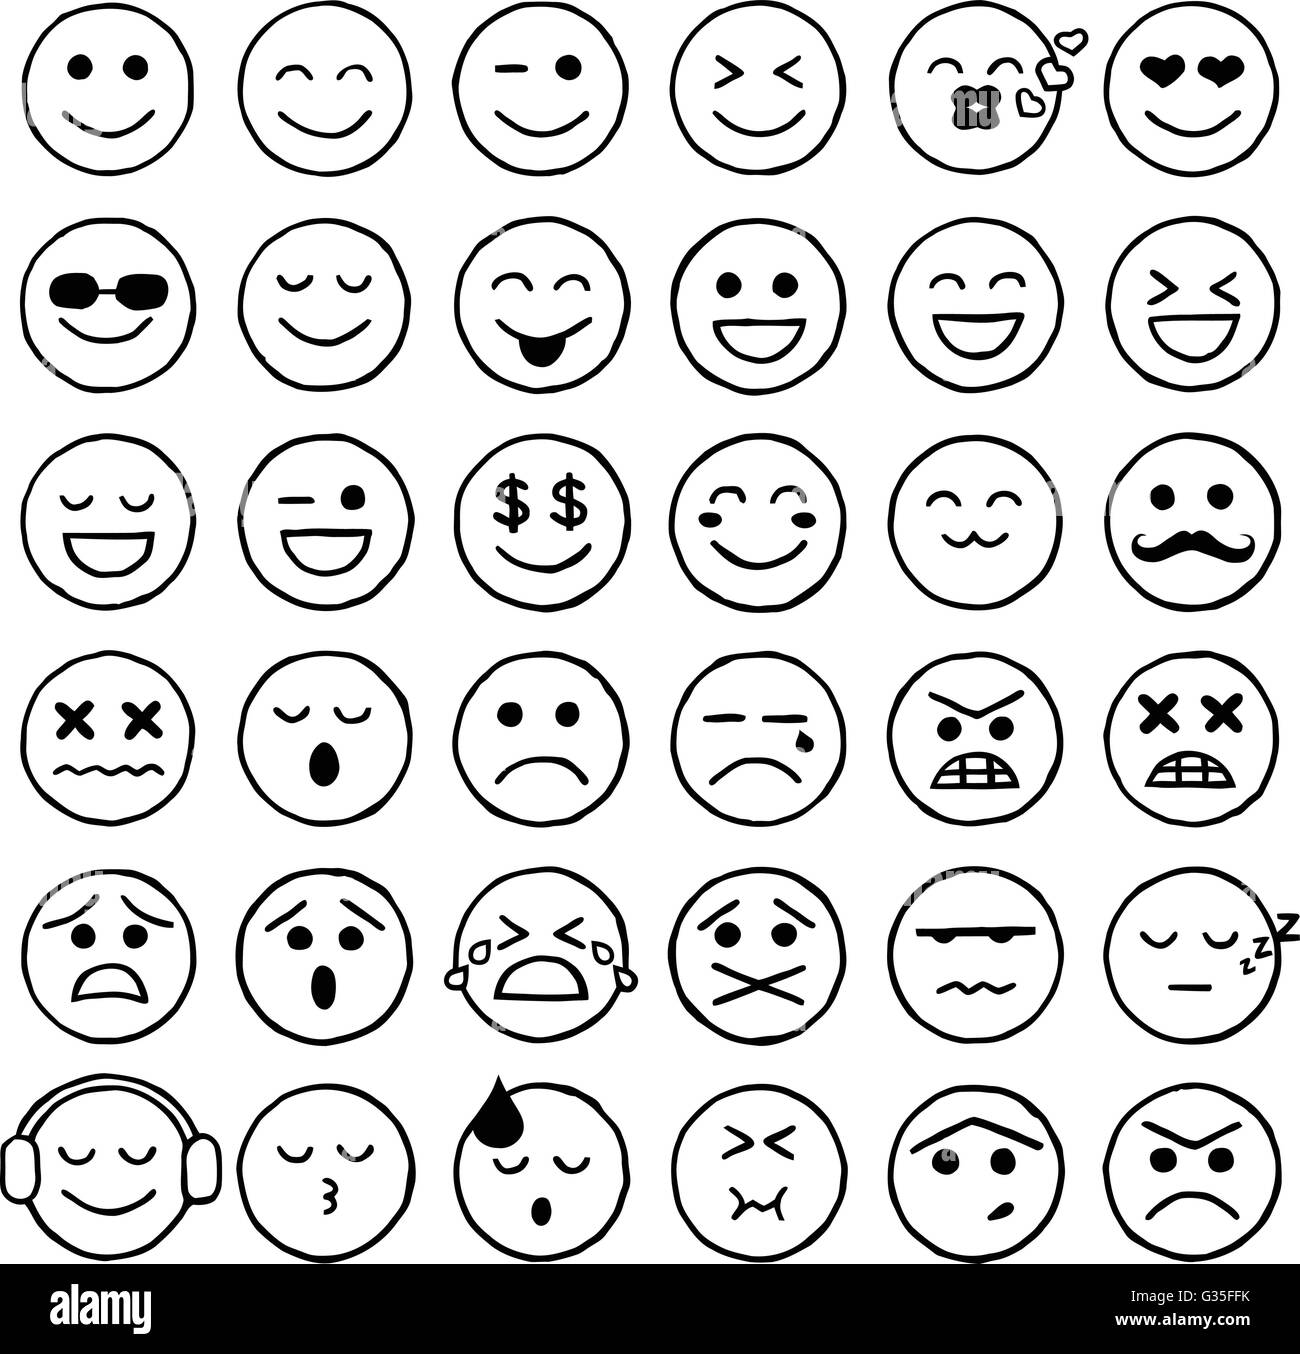 Smiley Icons, Emoticons, Facial Expressions, Internet Stock Vector ...